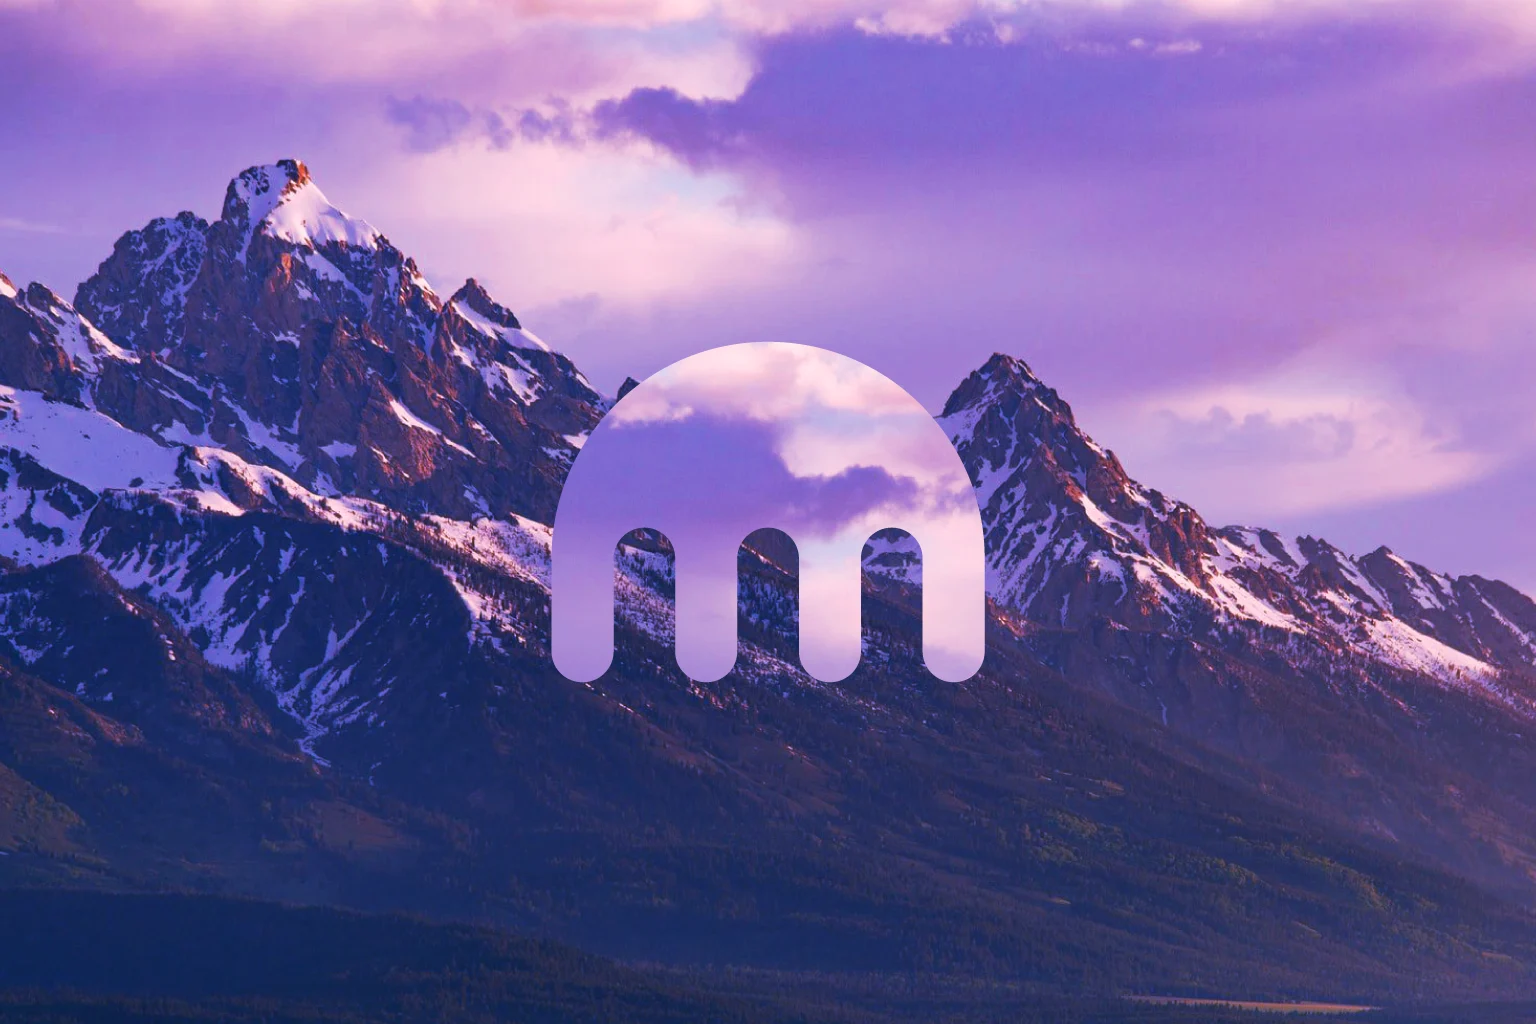 Kraken logo against the backdrop of mountains and clouds